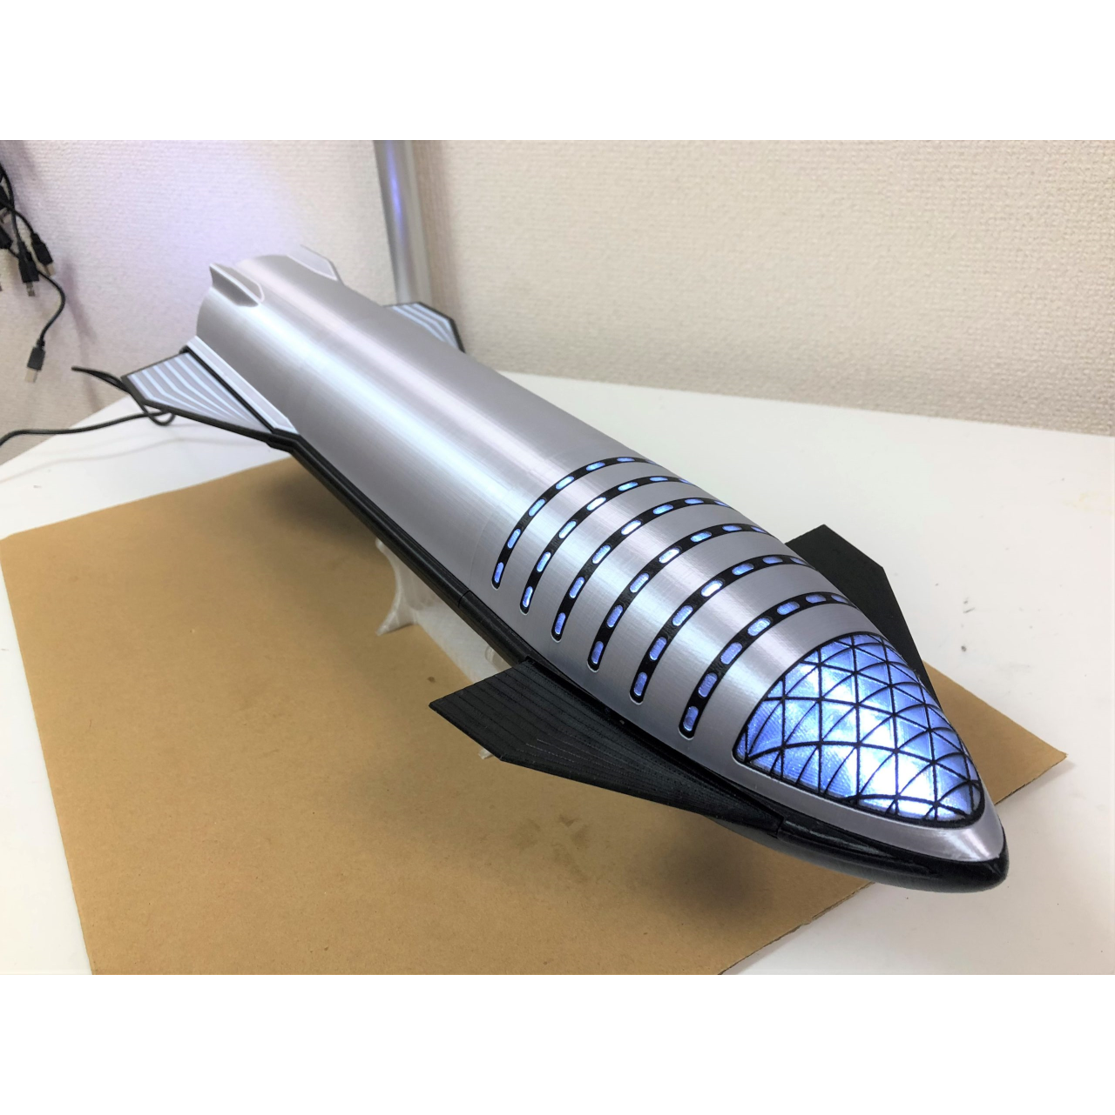 SpaceX Starship model kit with litghts and moving fins.